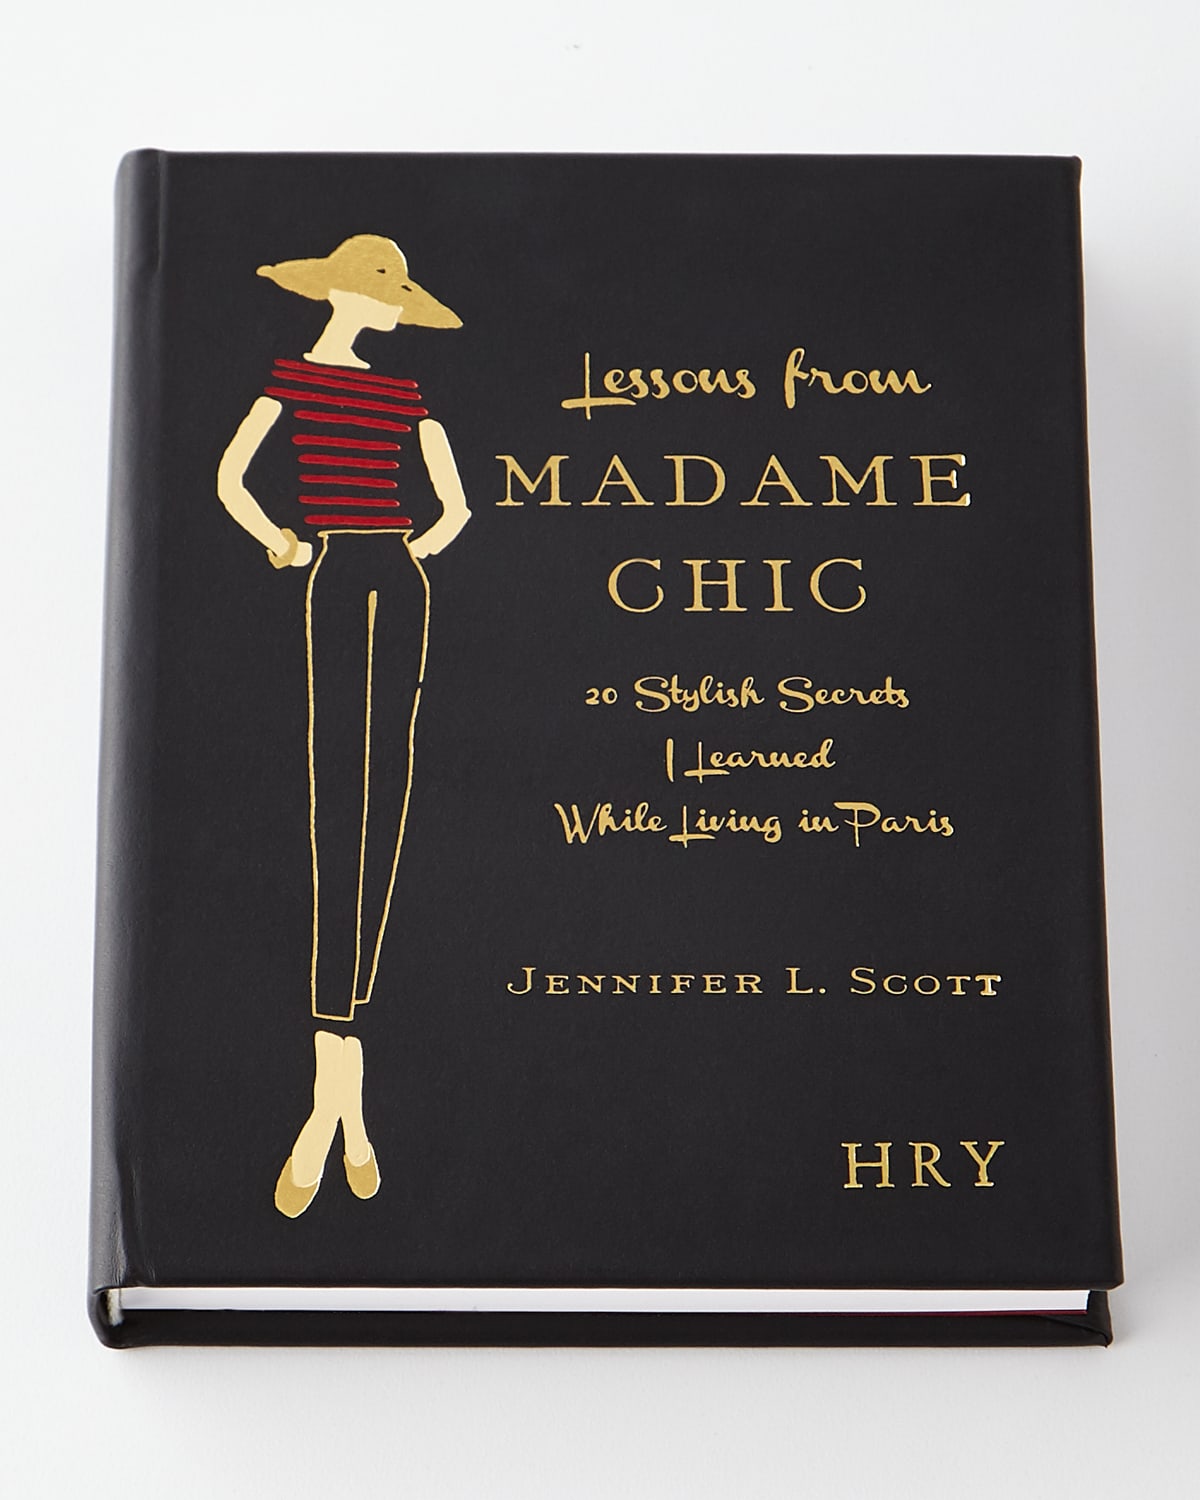 Shop Graphic Image Personalized "lessons From Madame Chic" Book By Jennifer L. Scott In Black